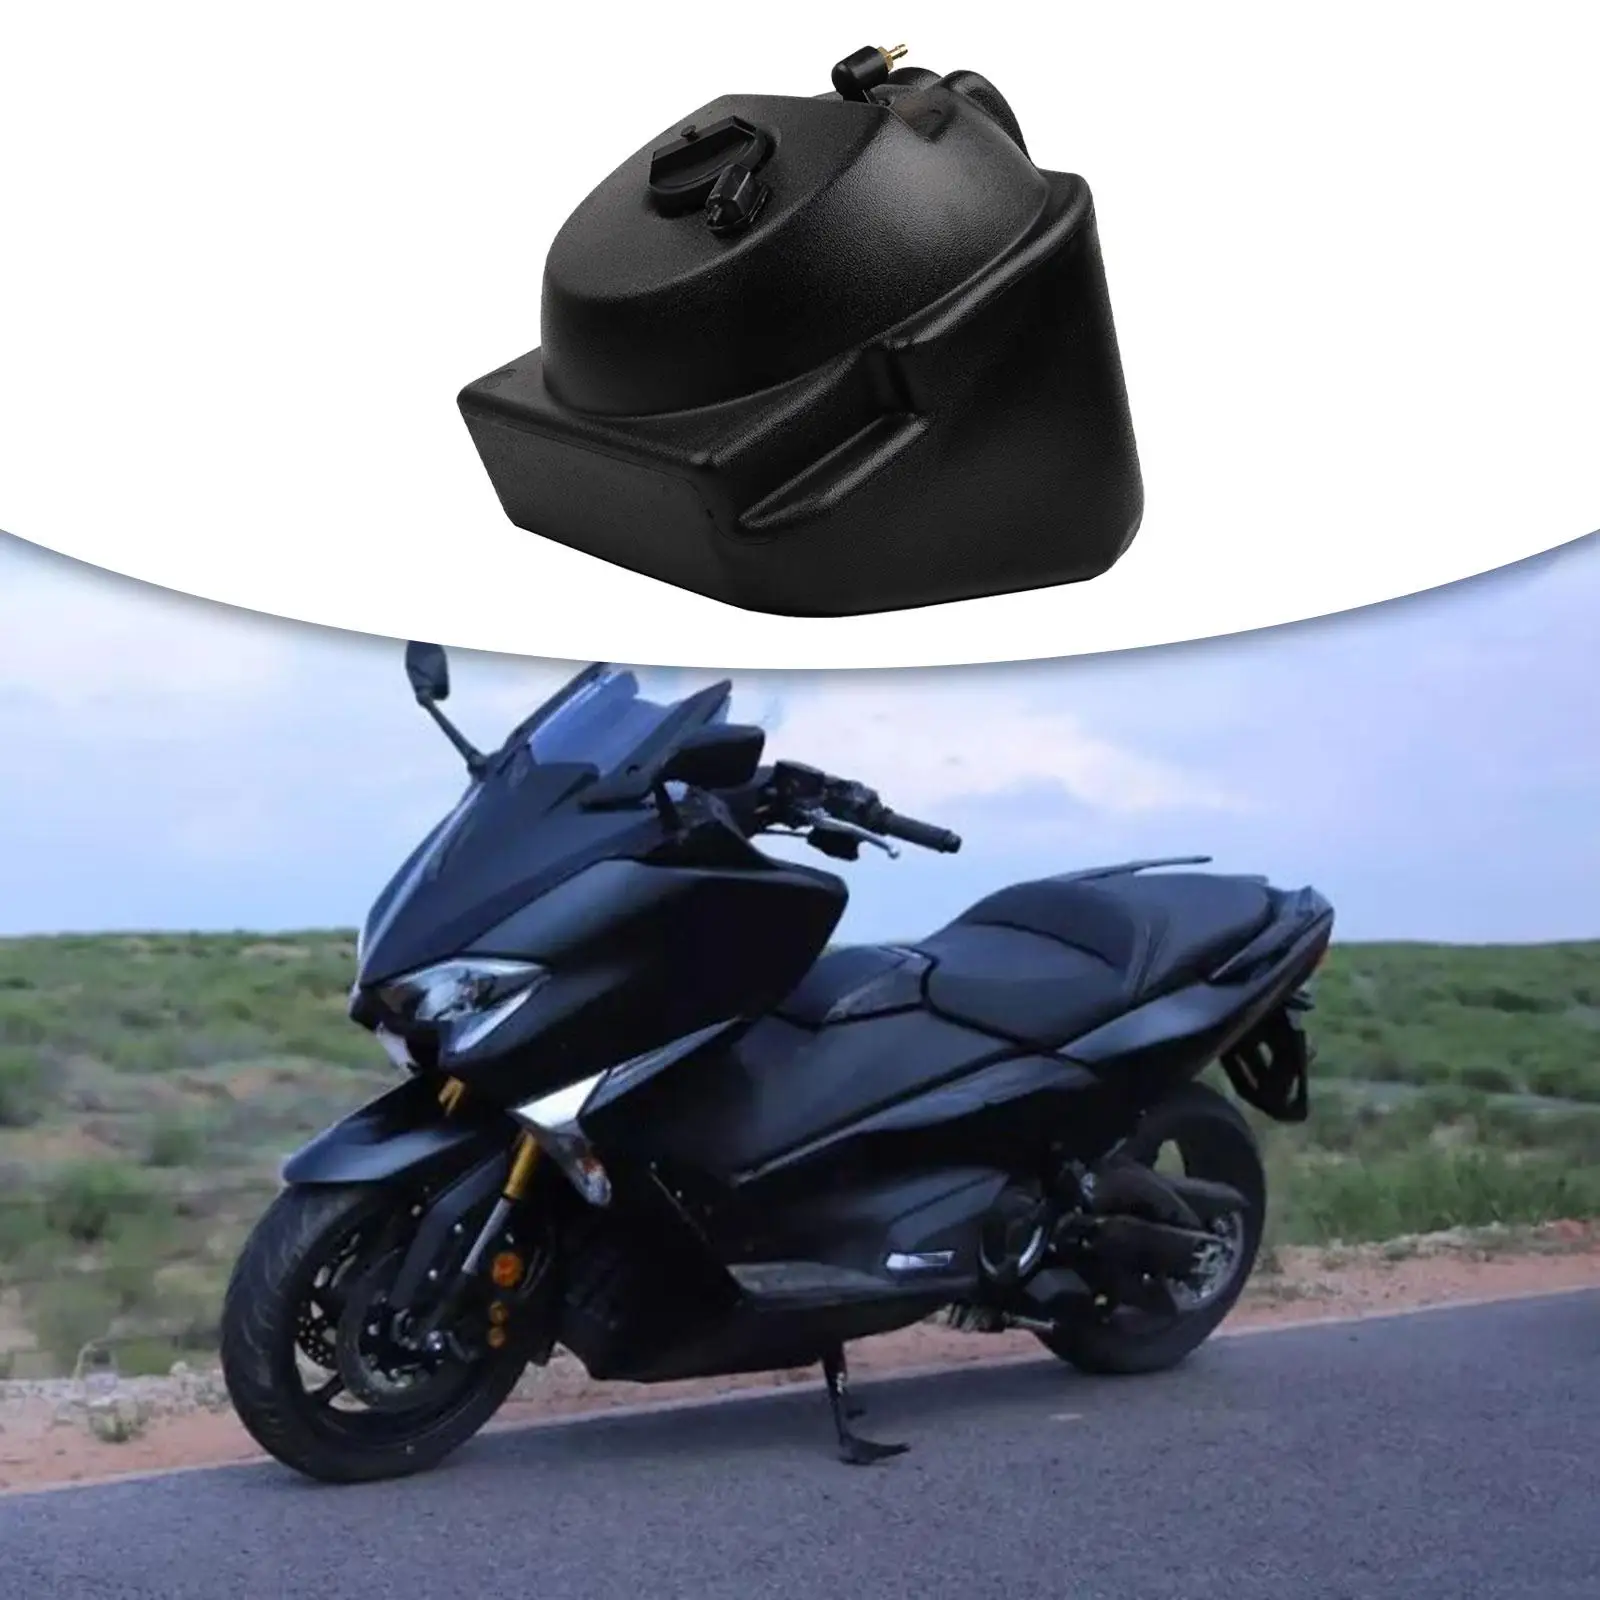 Black Auxiliary Fuel Tank Motorcycle Parts Spare Parts Replaces Fuel Petrol Tank for Yamaha Xmax250 Nmax155 Xmax300 Tmax560